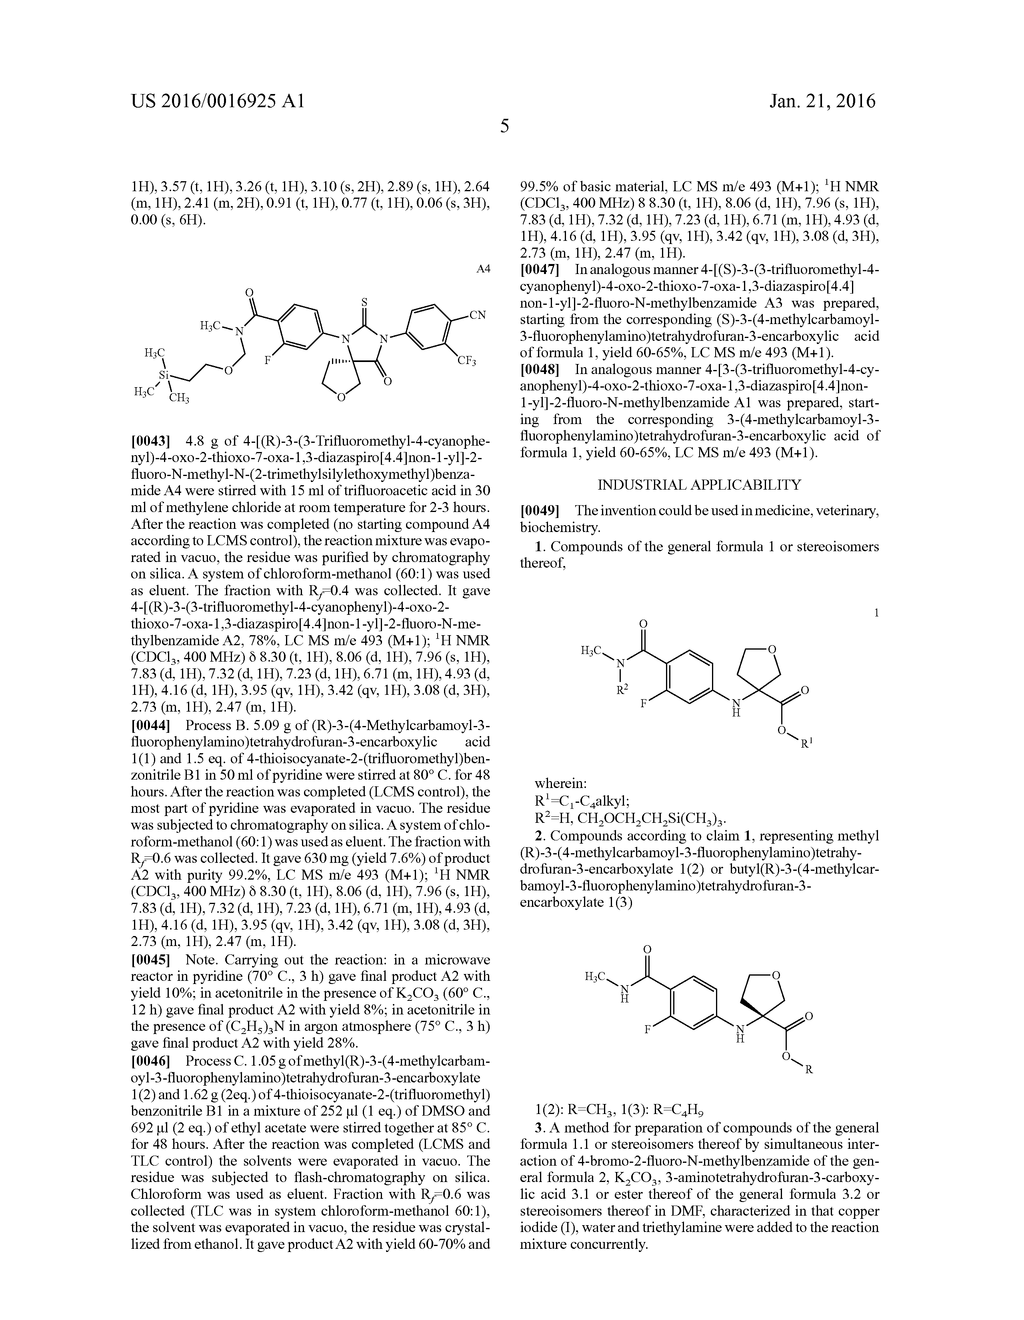 Substituted     (R)-3-(4-methylcarbamoyl-3-fluorophenylamino)tetrahydrofuran-3-encarboxyl-    ic acid (variants) and ester thereof, method for preparation and use - diagram, schematic, and image 06